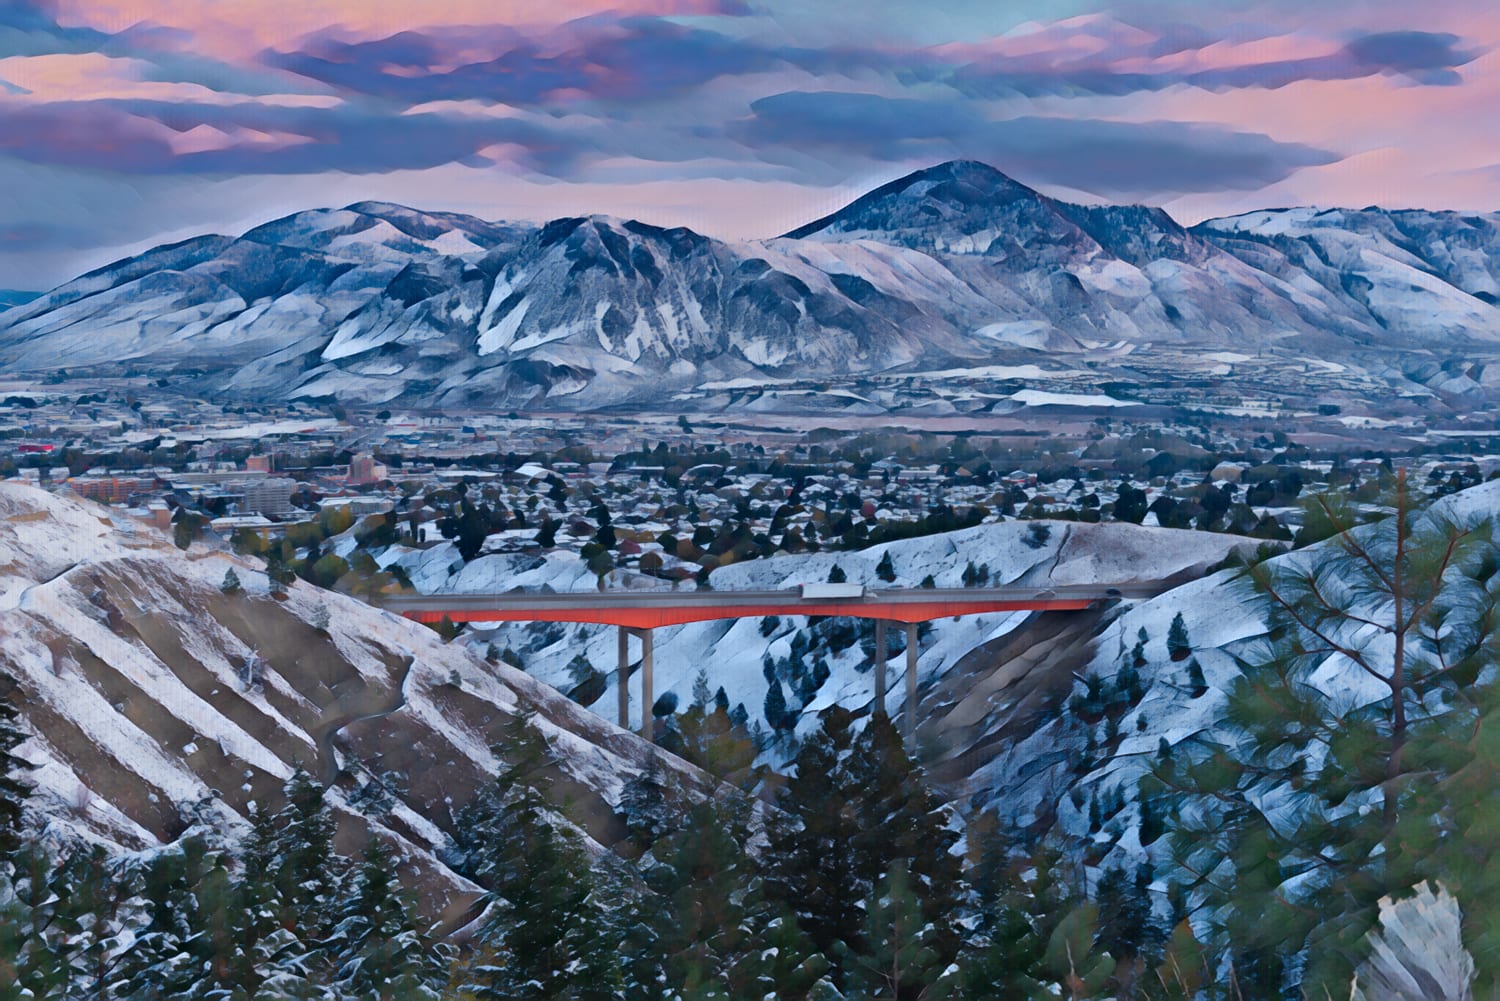 Kamloops Abstract pink and purple sky with snowy mountain and hills with red bridge